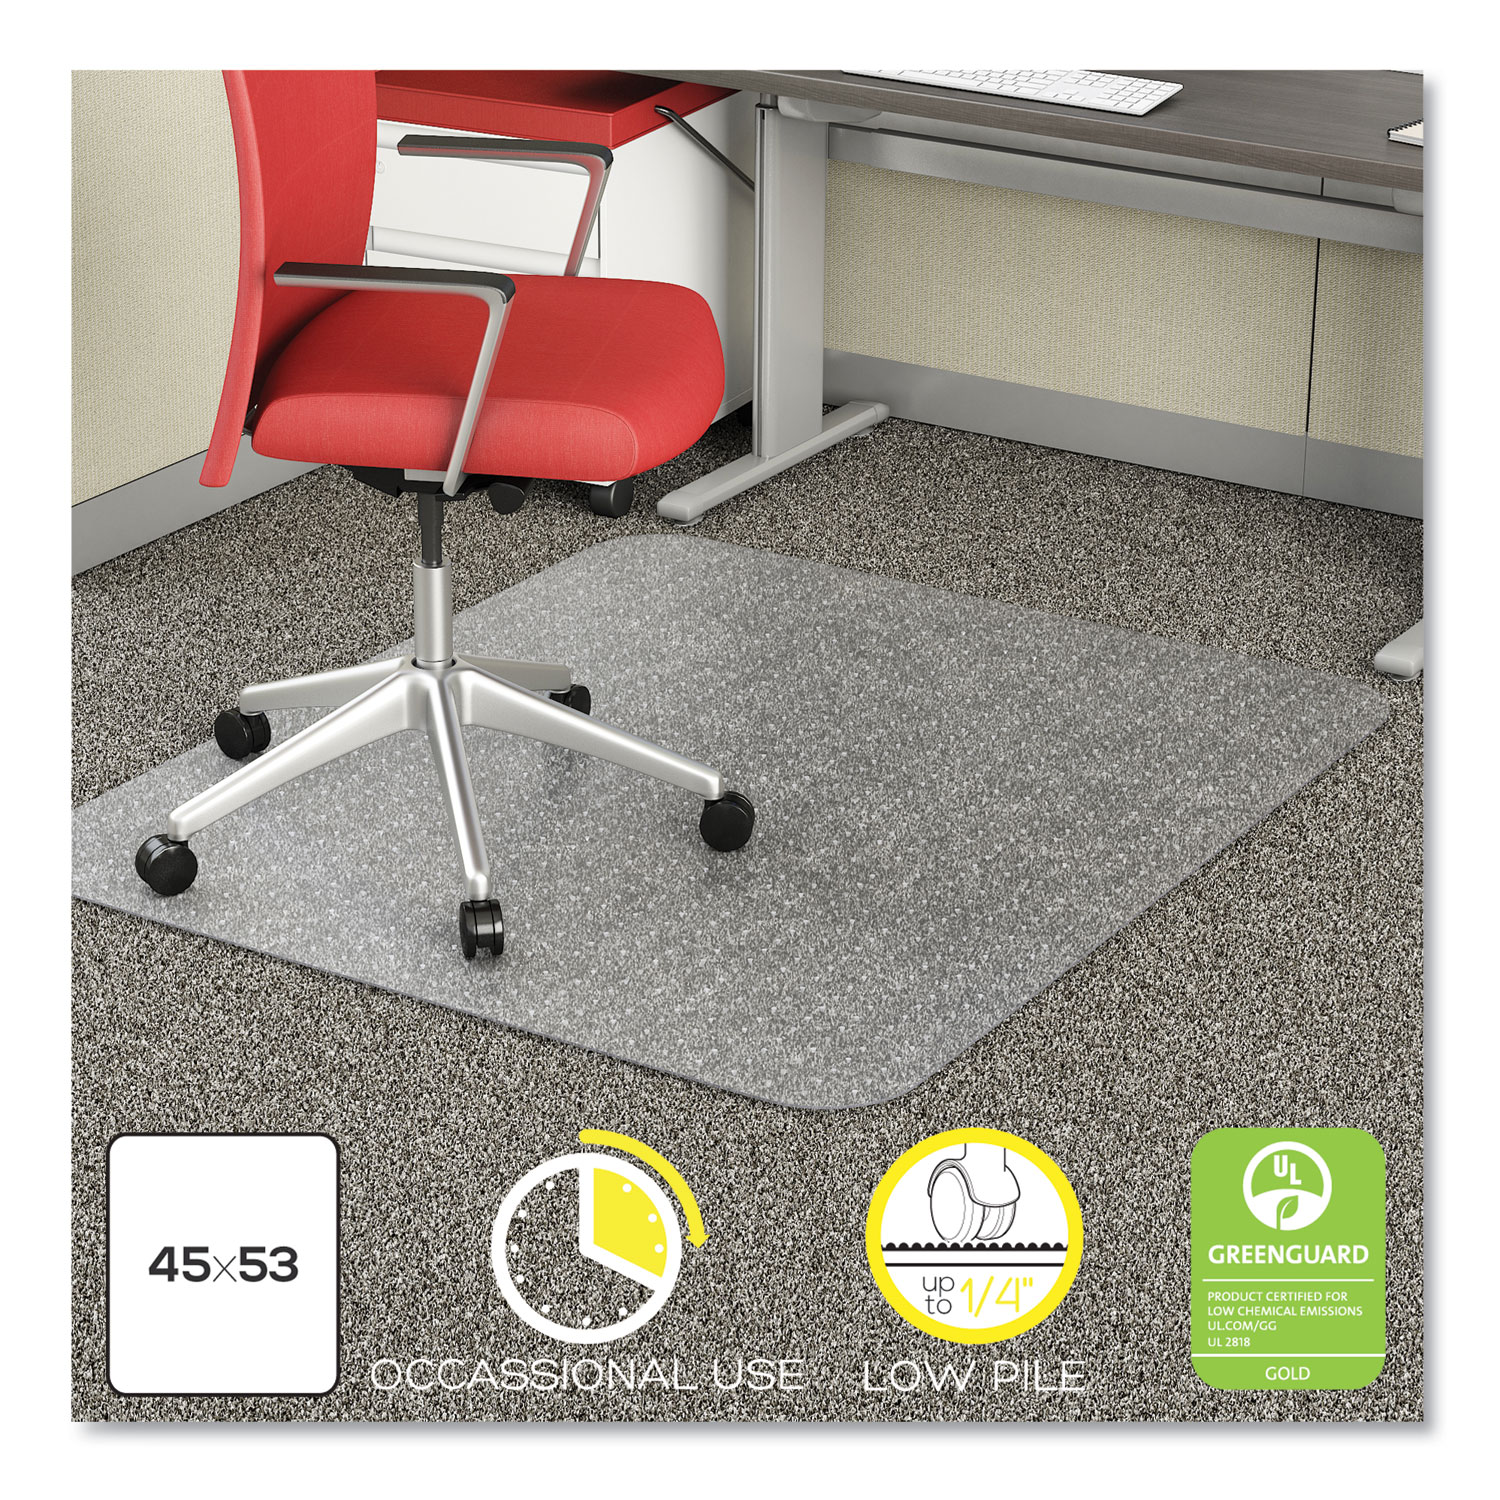 Glide Right Vinyl Chair Mat Clear Rectangular for Low Pile Carpeted Floors 45 x 53 